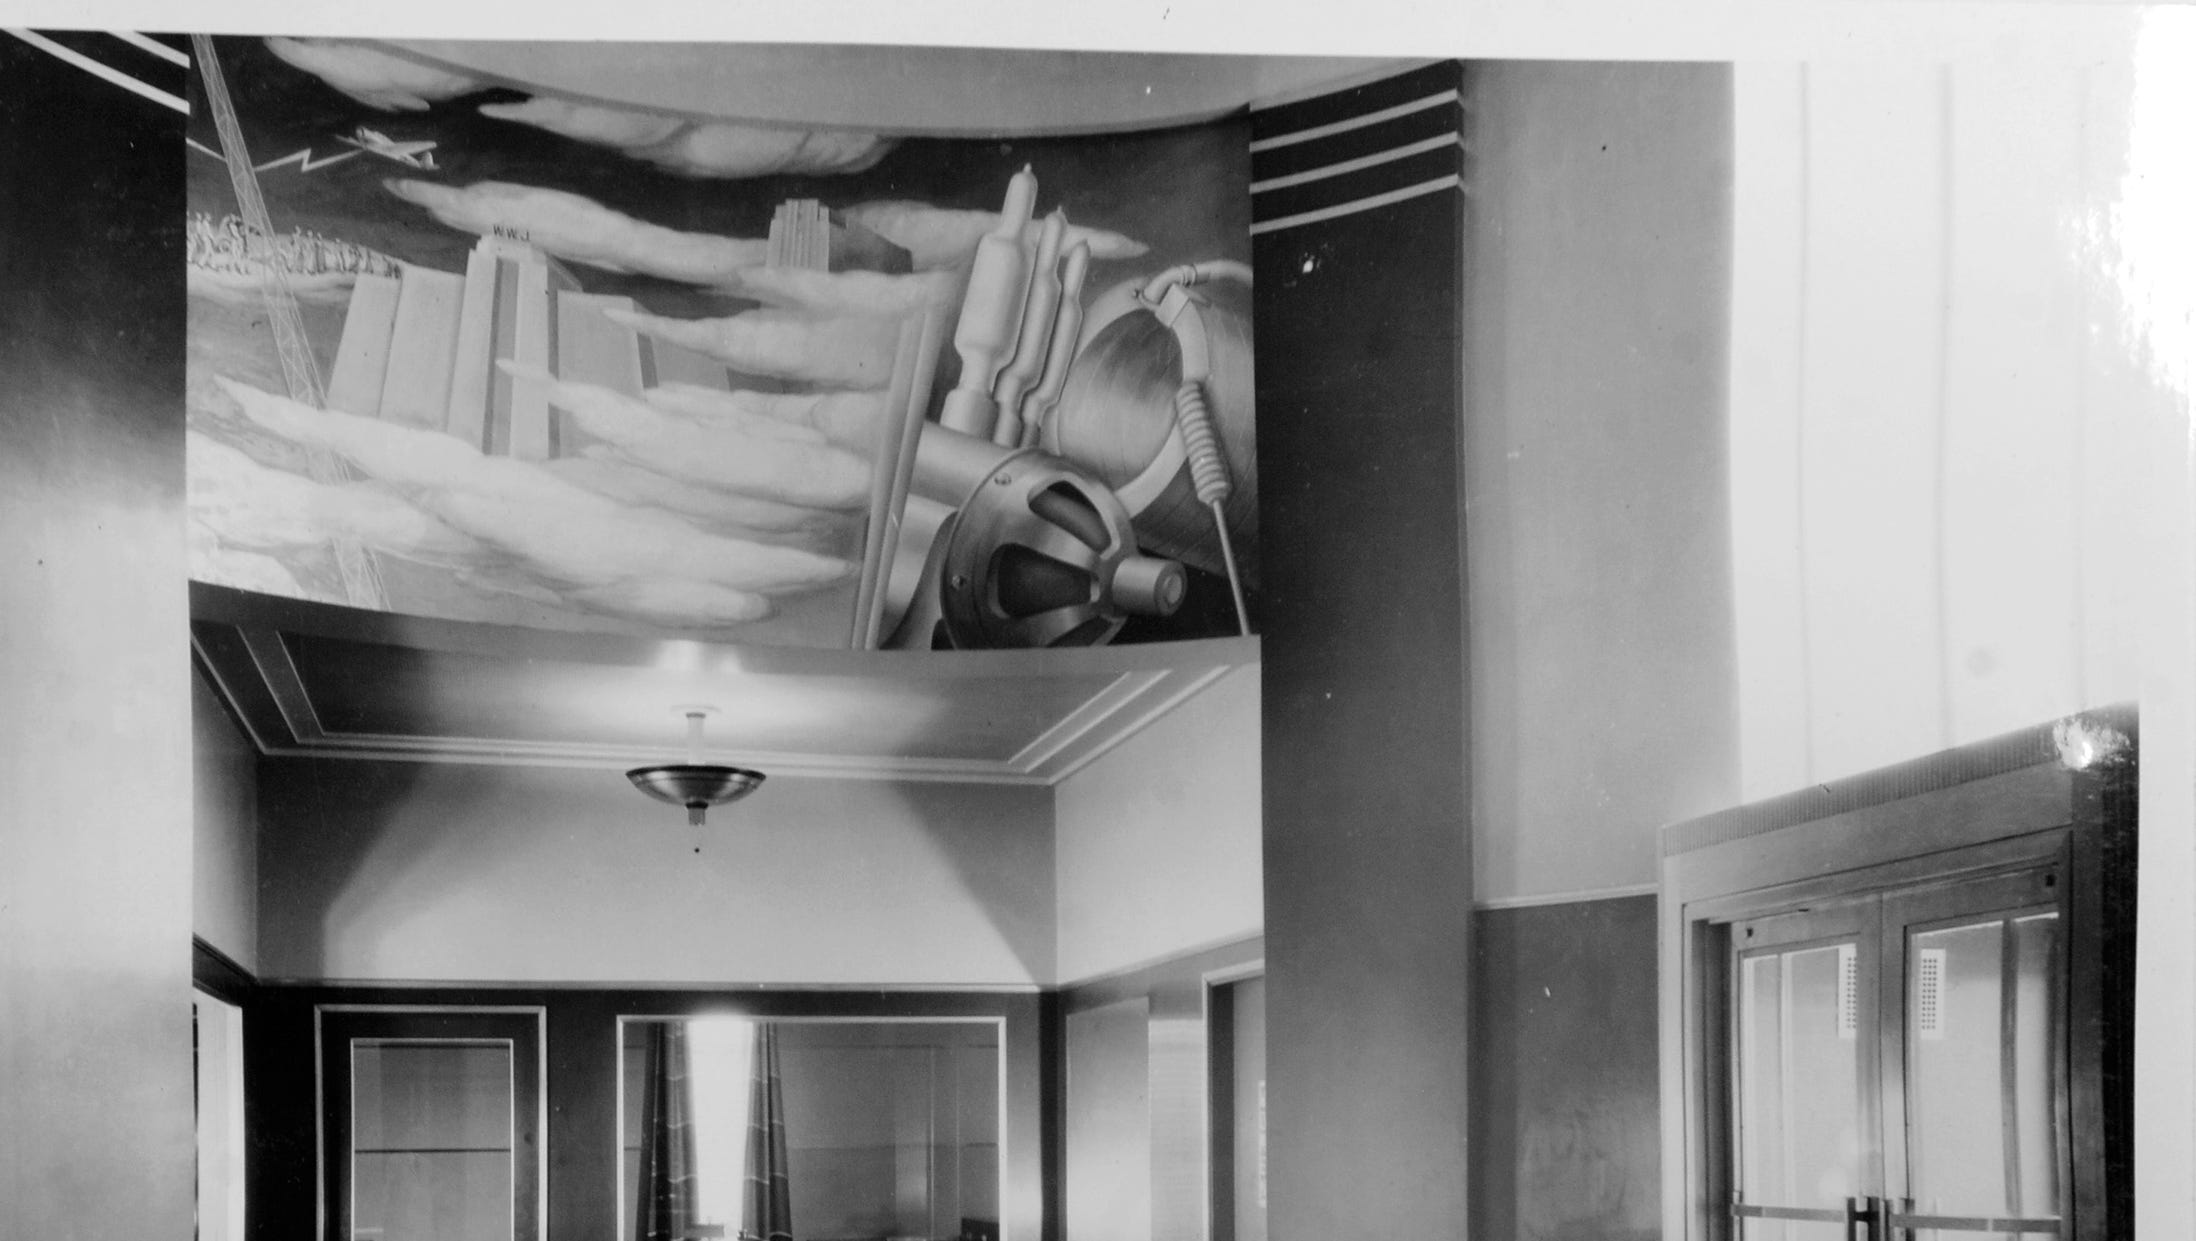 A mural depicting a fanciful scene in the sky adorned the lobby of the transmitter building.